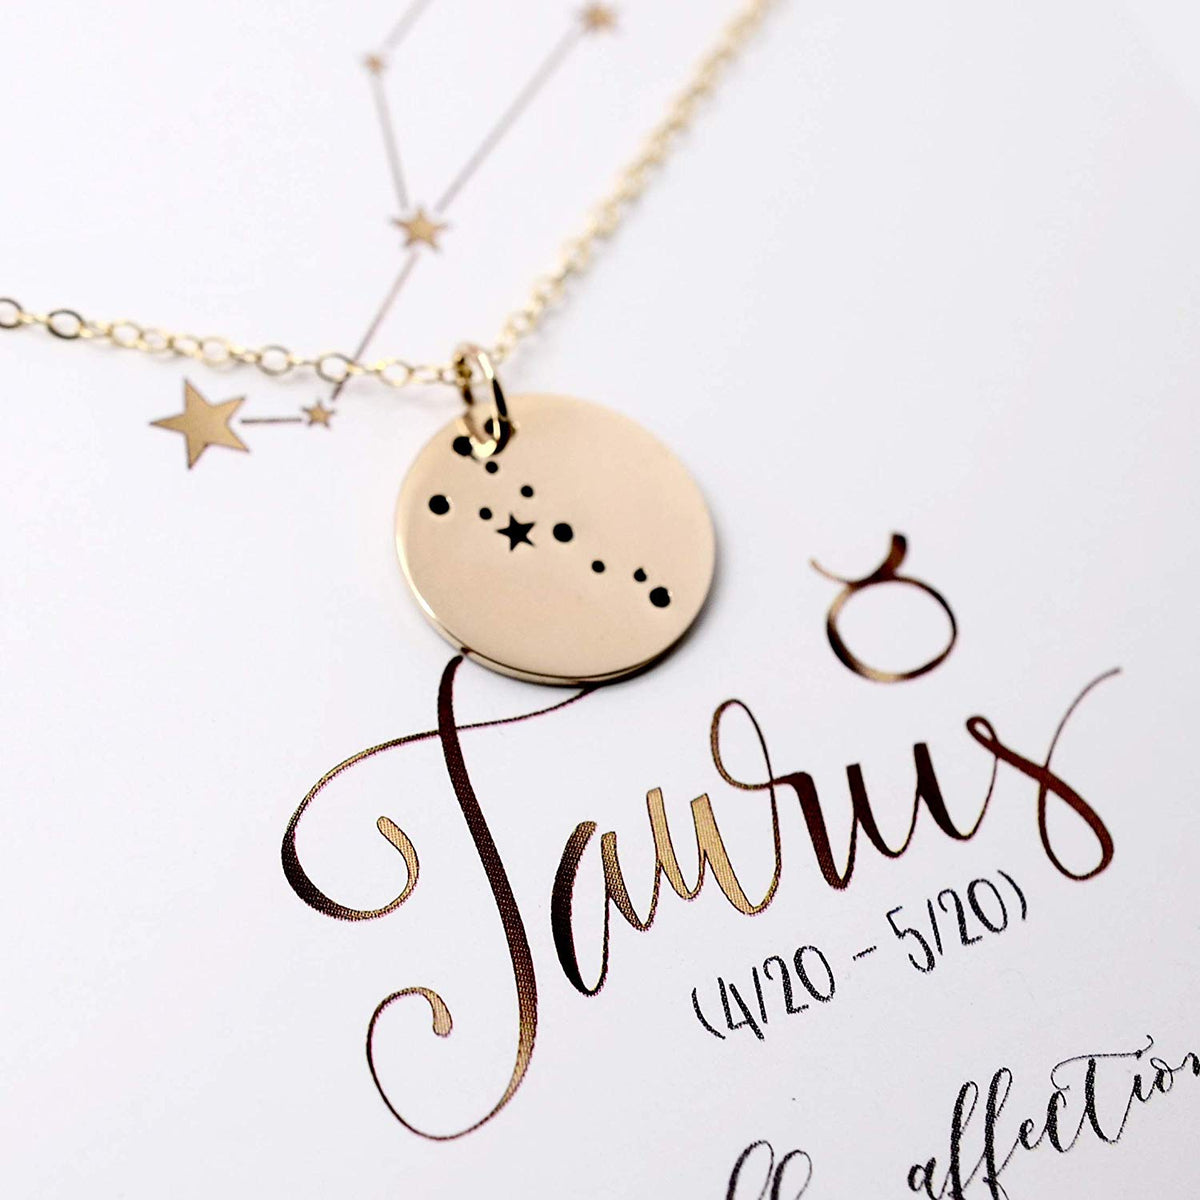 Taurus Zodiac Sign 14K Gold Filled Constellation Necklace - Love It Personalized